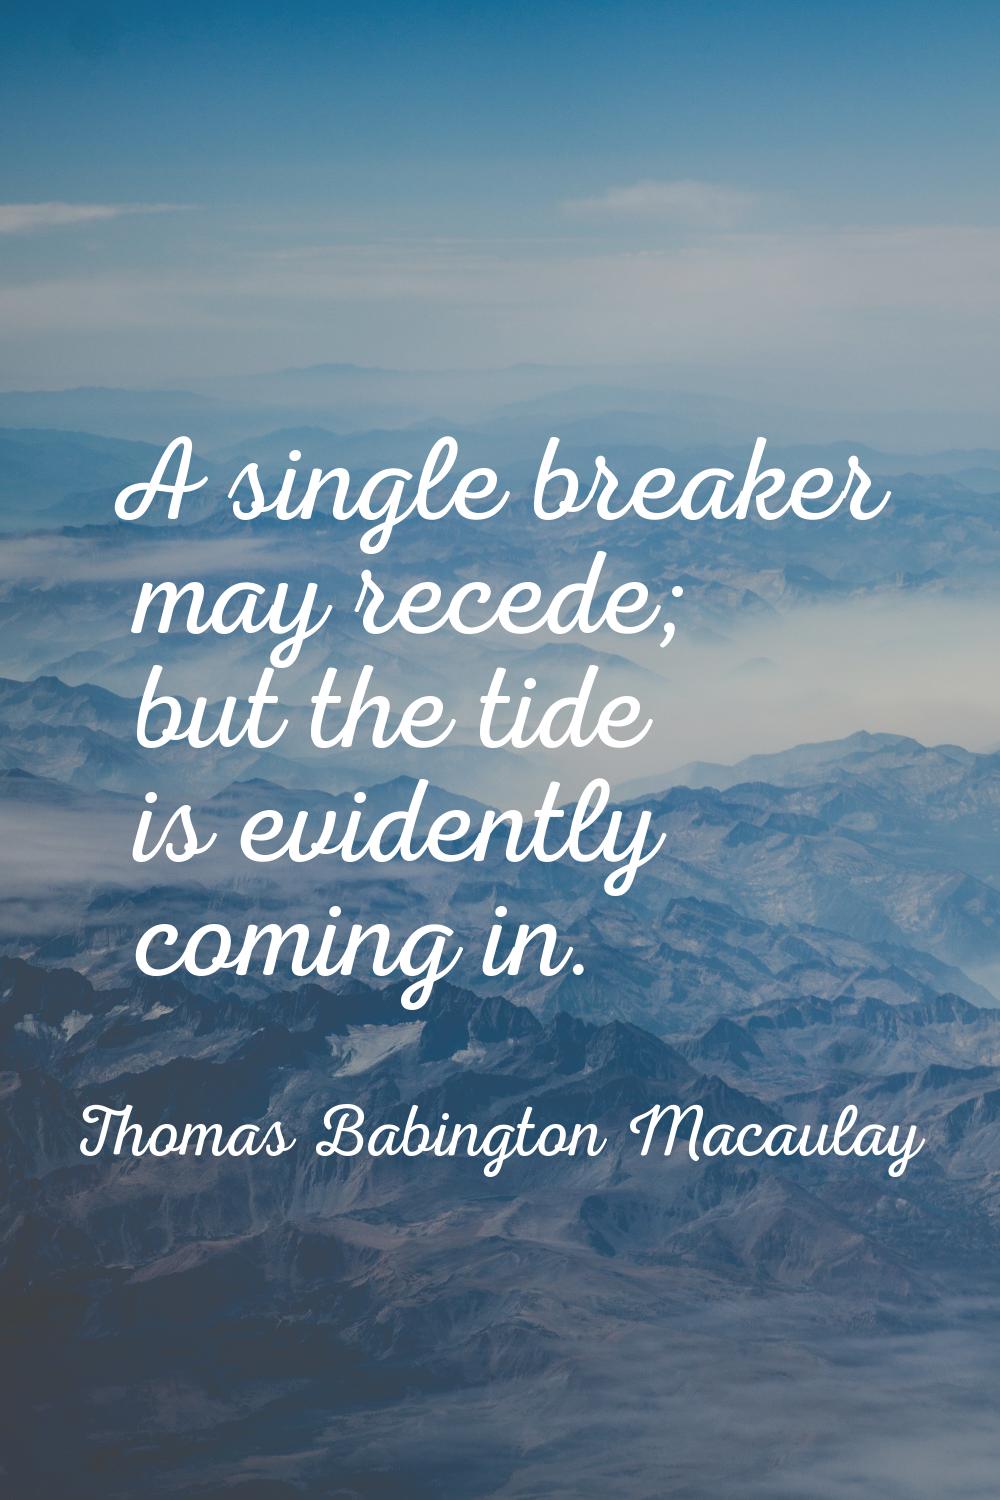 A single breaker may recede; but the tide is evidently coming in.